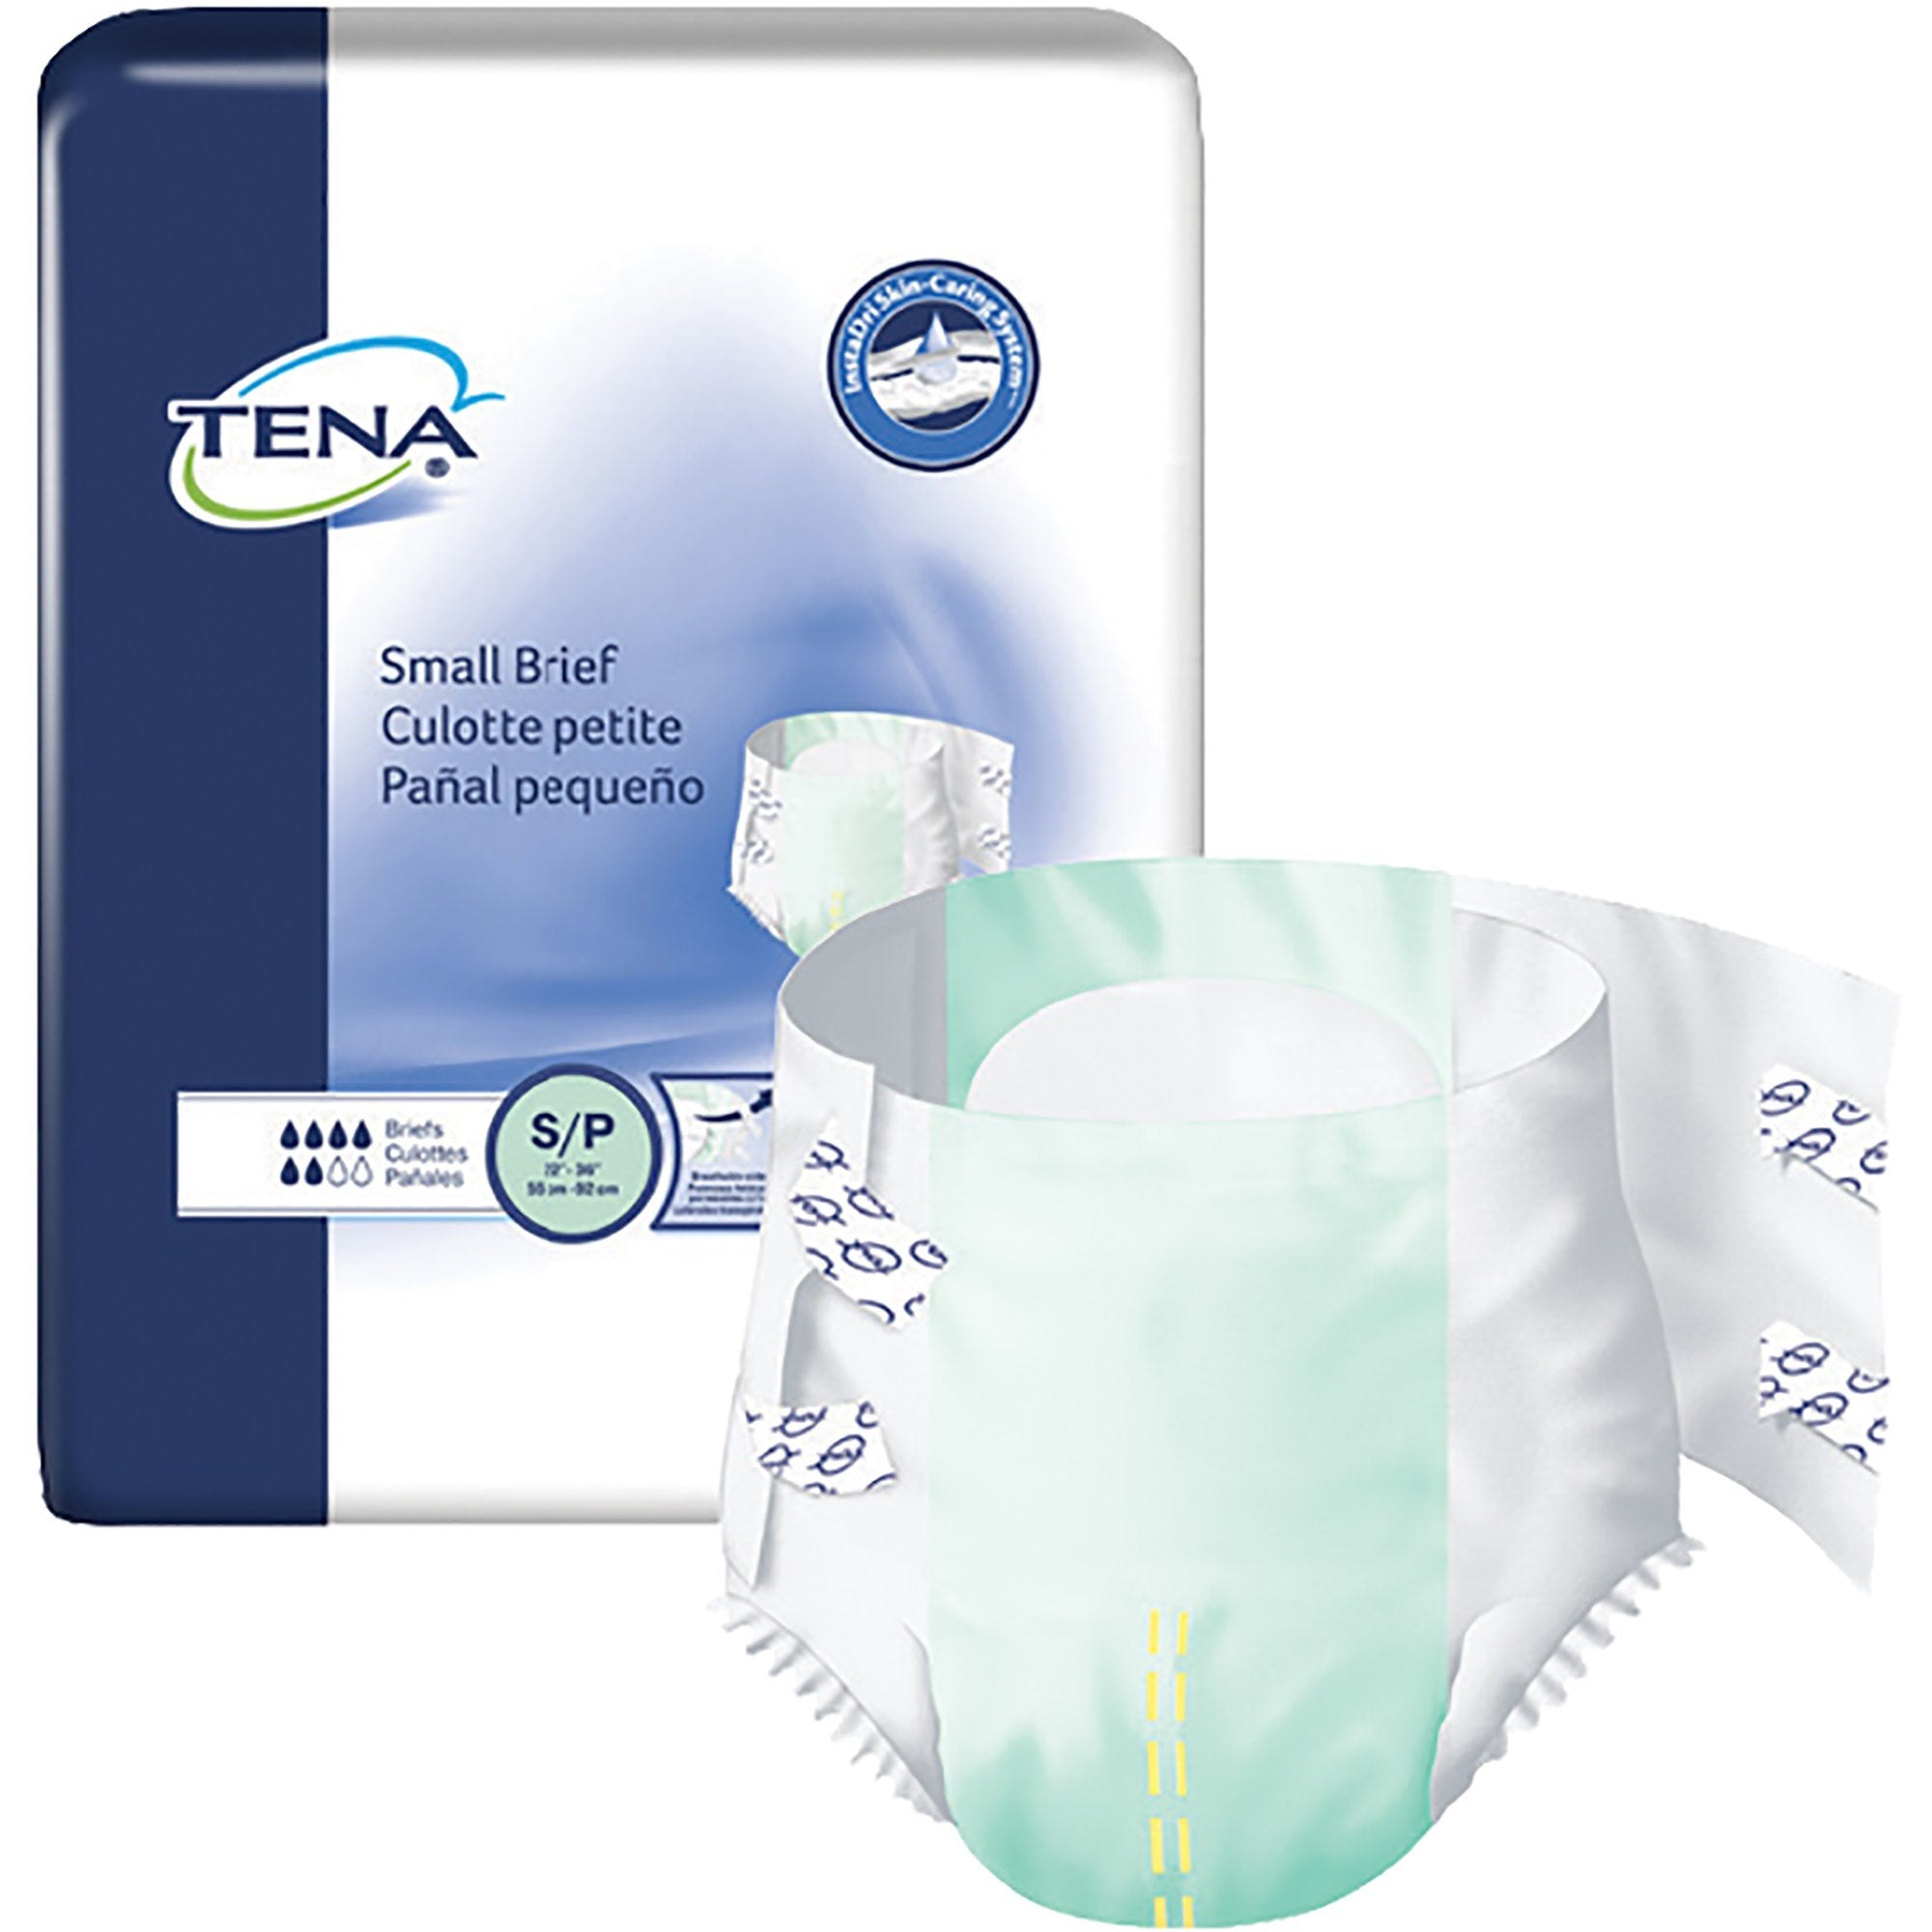 What Type of Bowel Incontinence Products do I Need? - TYE Medical